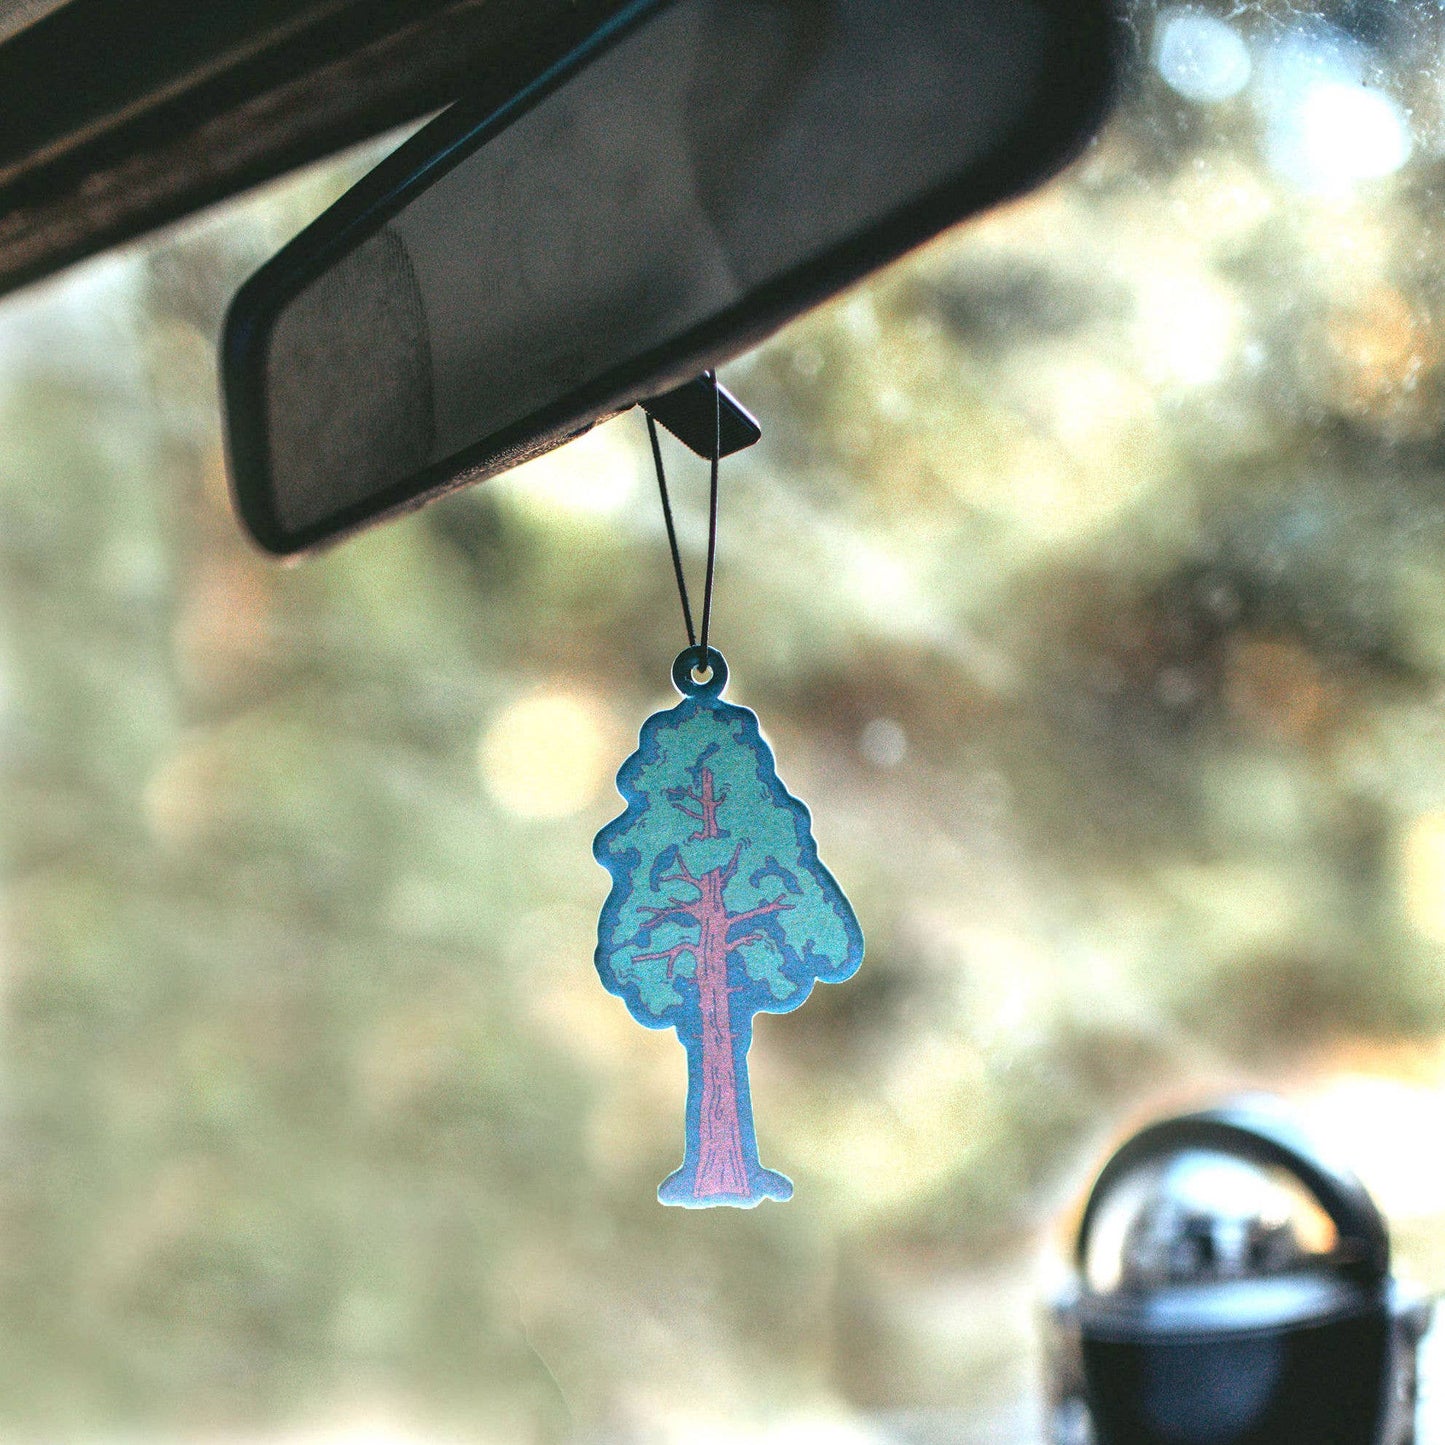 Redwood shaped air freshener by Good + Well Supply Co